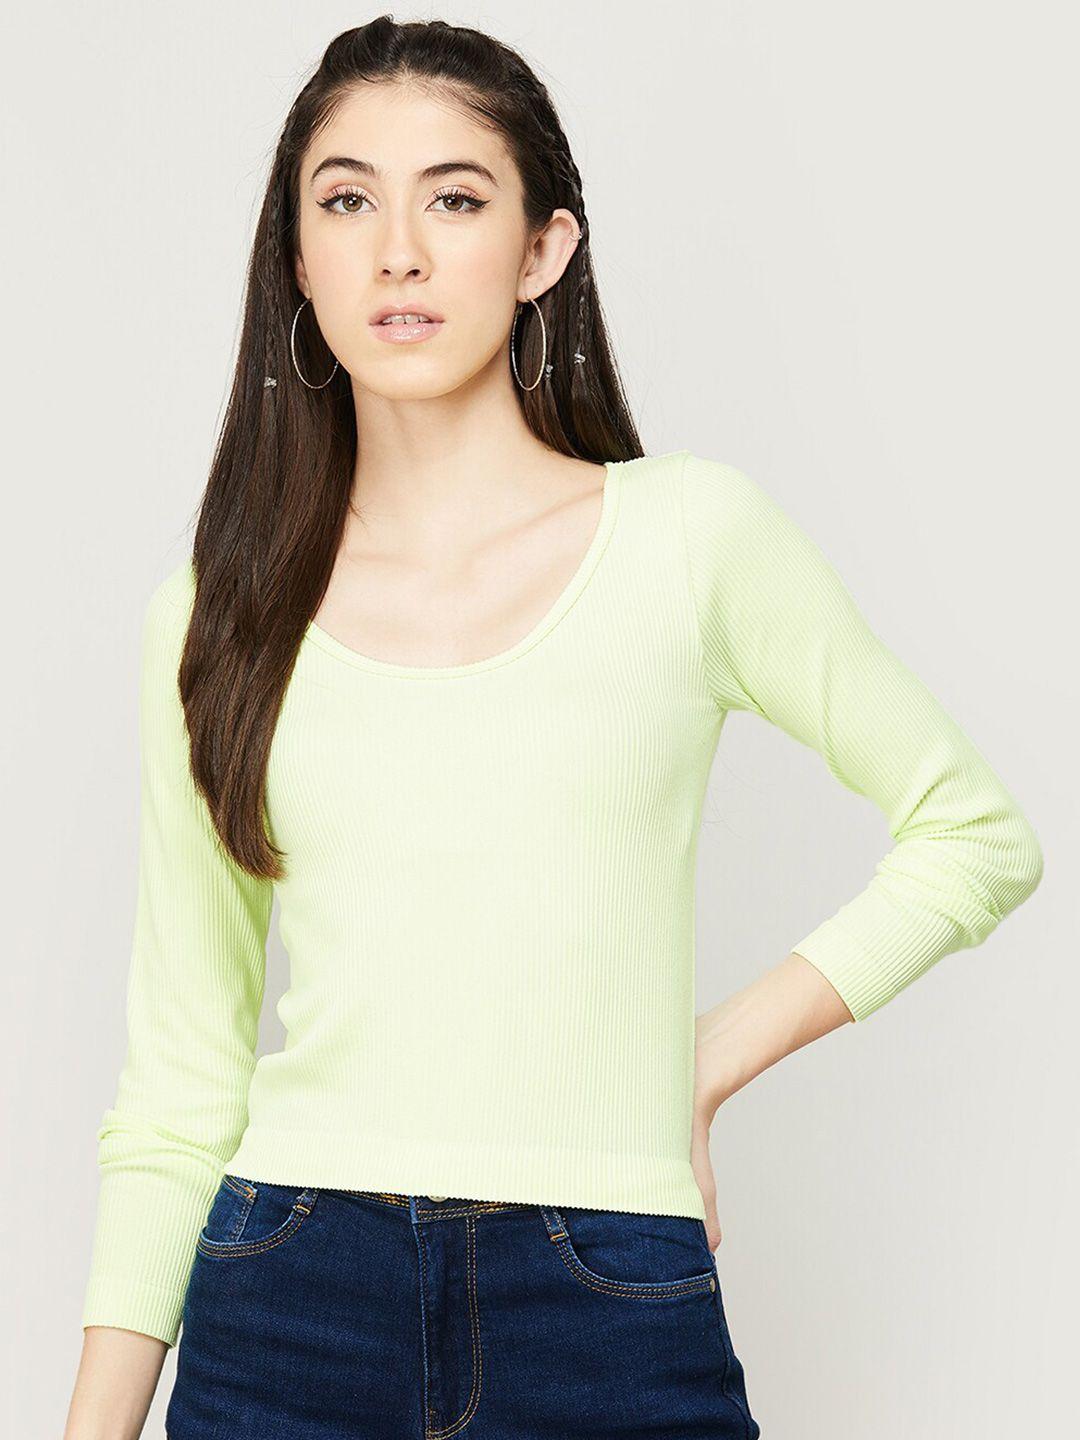 ginger by lifestyle green solid nylon top